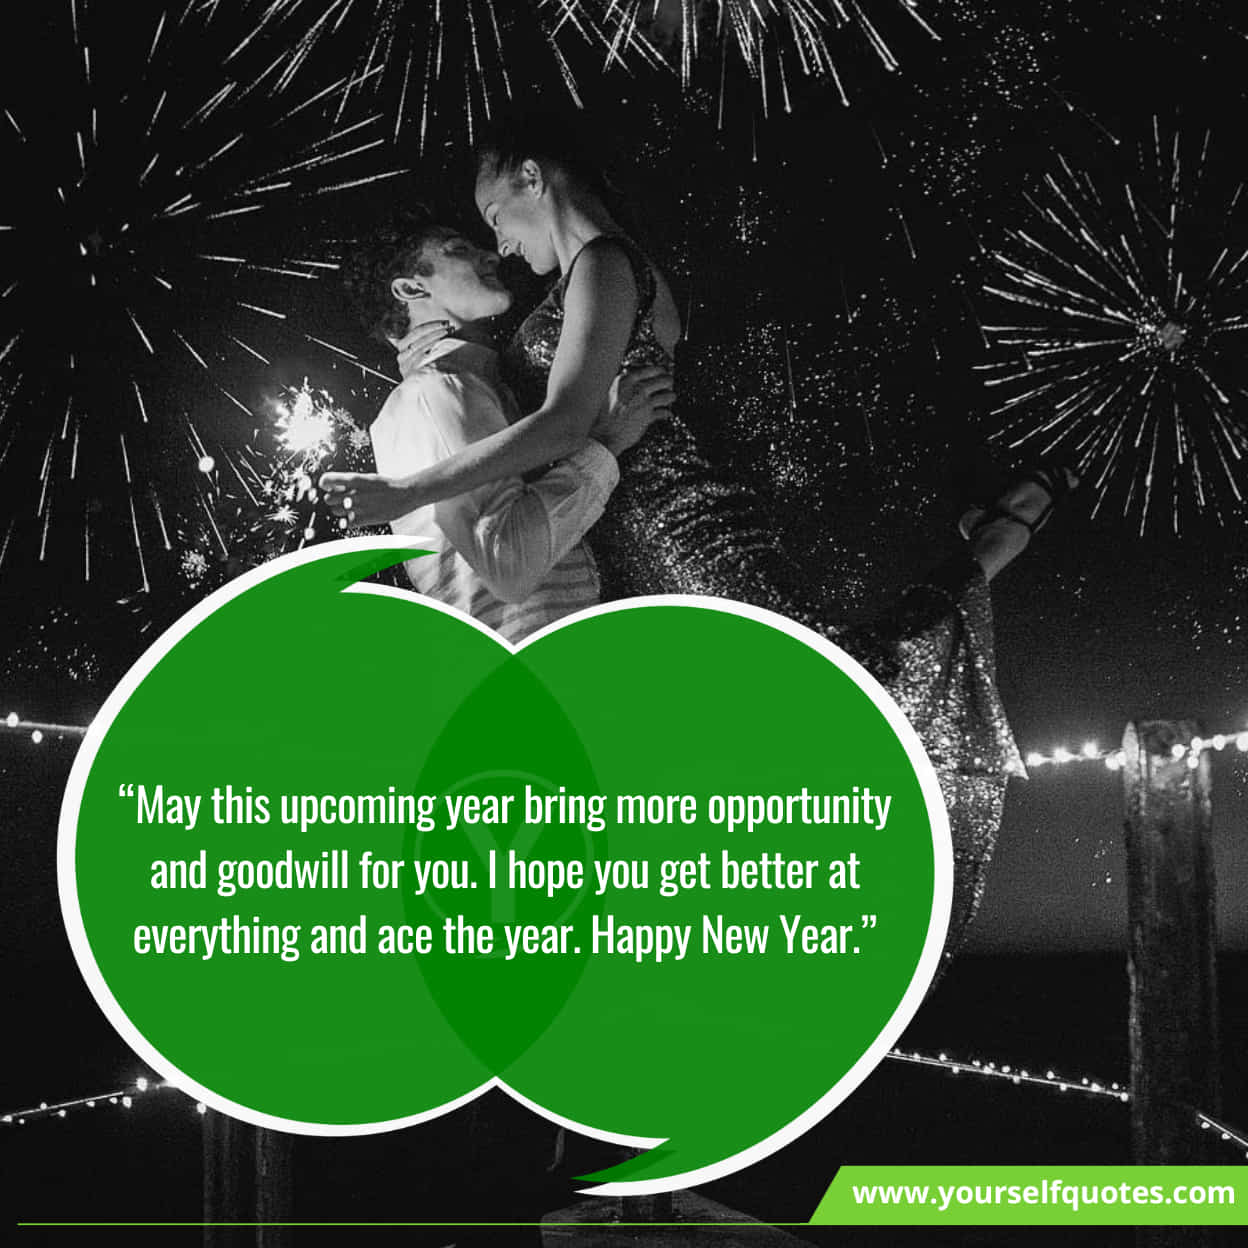 Lovely New Year Wishes For Husband & Wife 